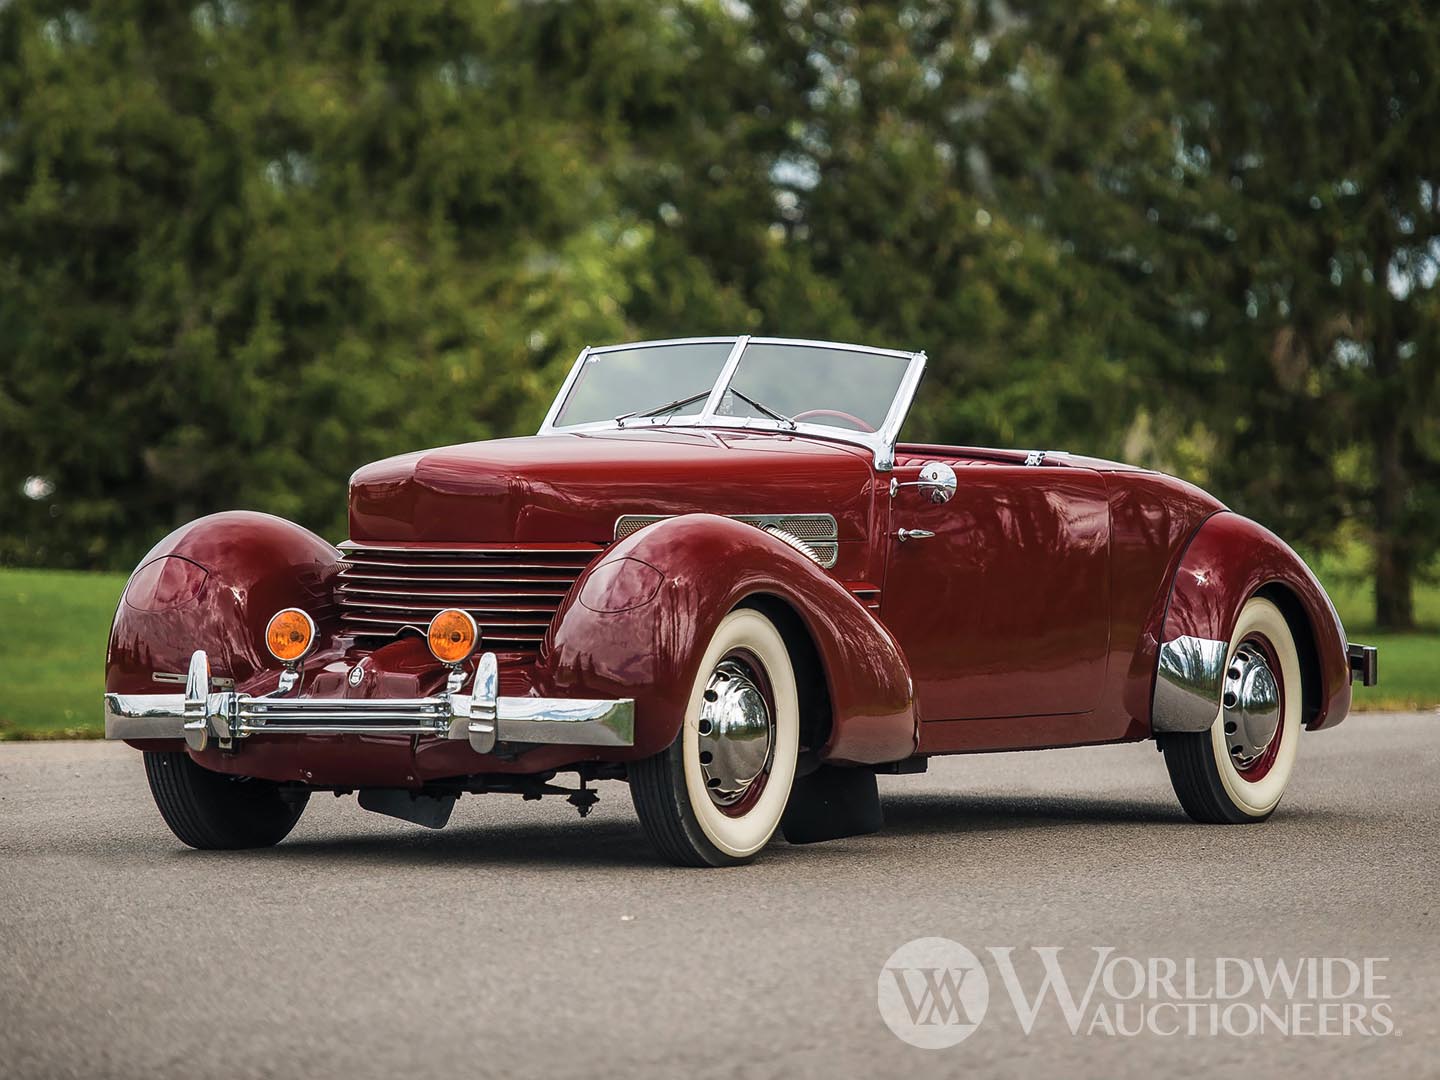 1937 Cord 812 'Sportsman' Convertible Coupe